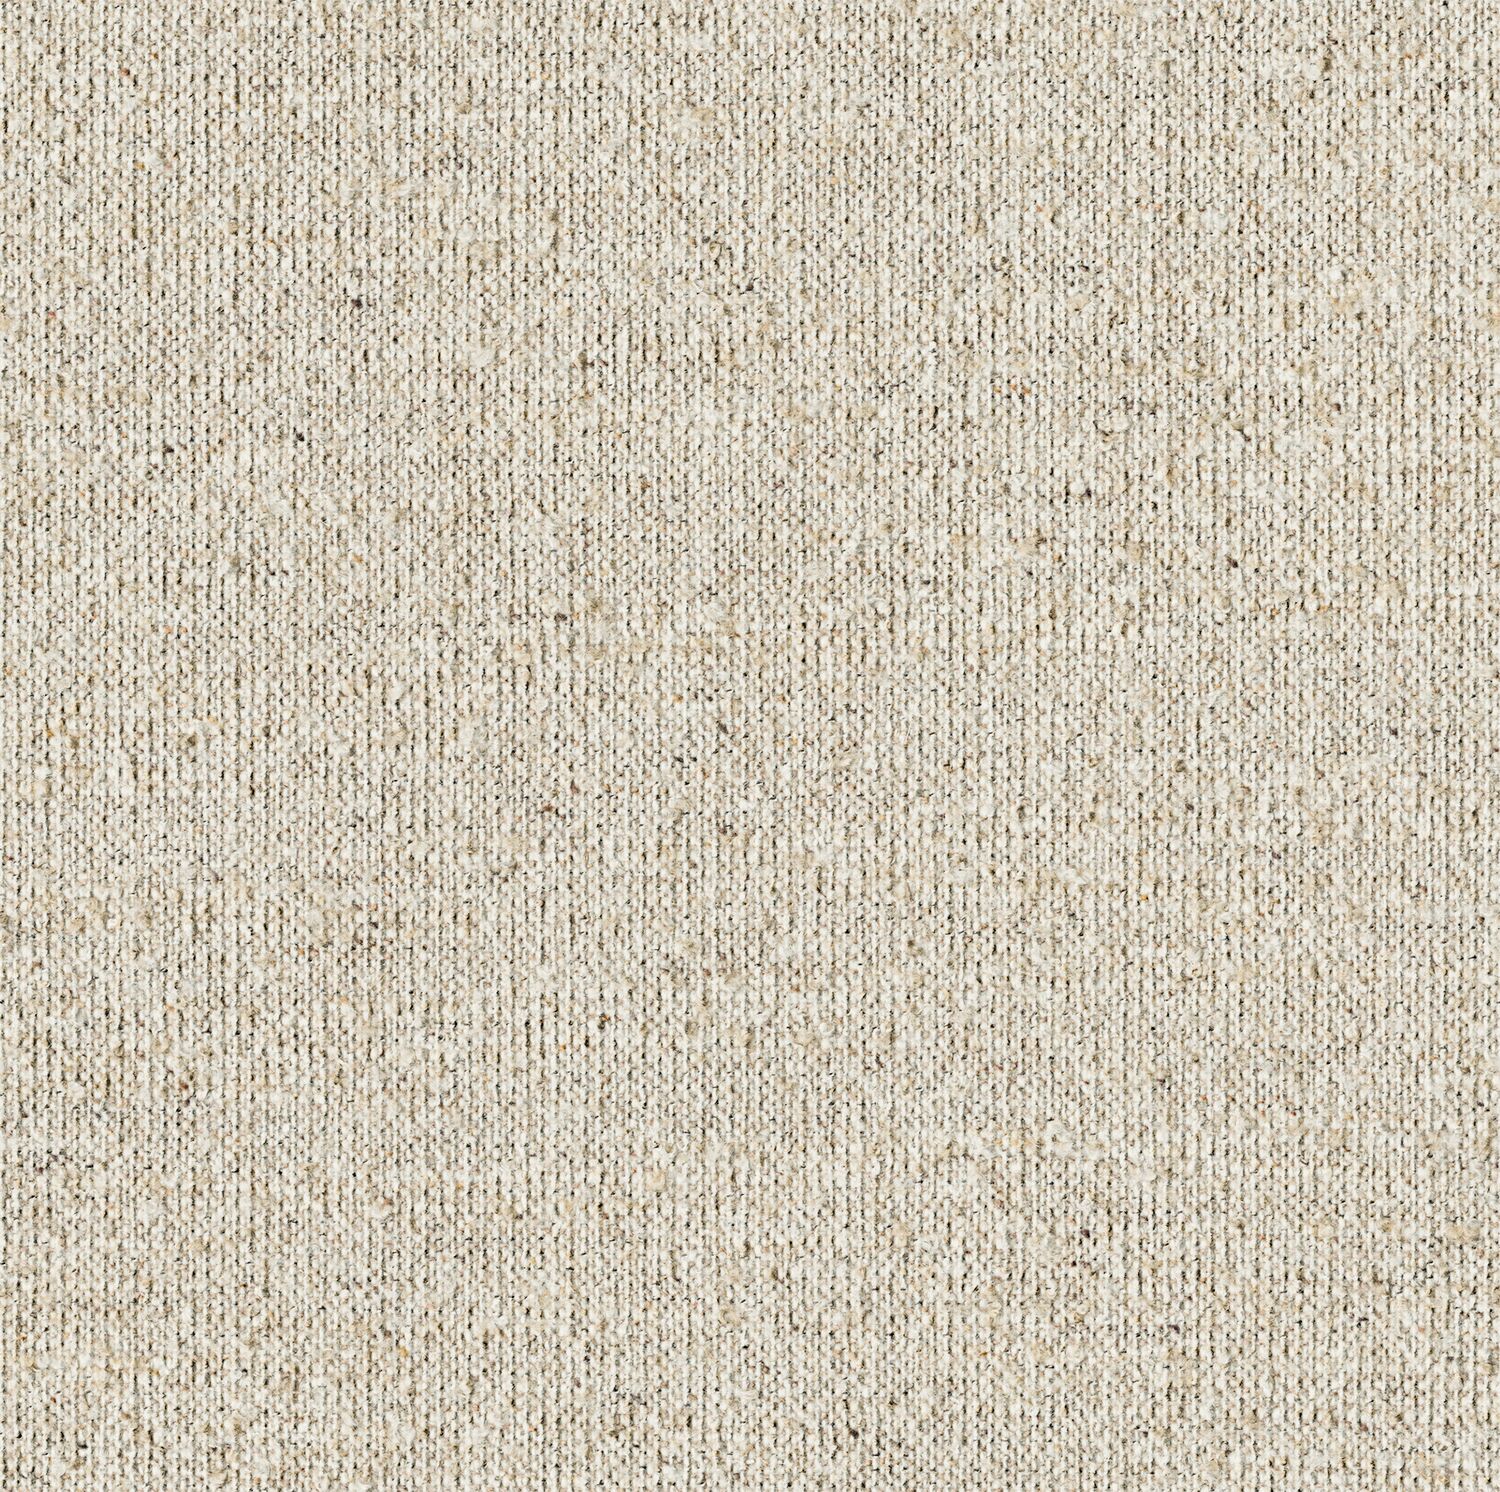 Everyday Boucle - Lamb's Ear - 4111 - 06 - Half Yard Tileable Swatches